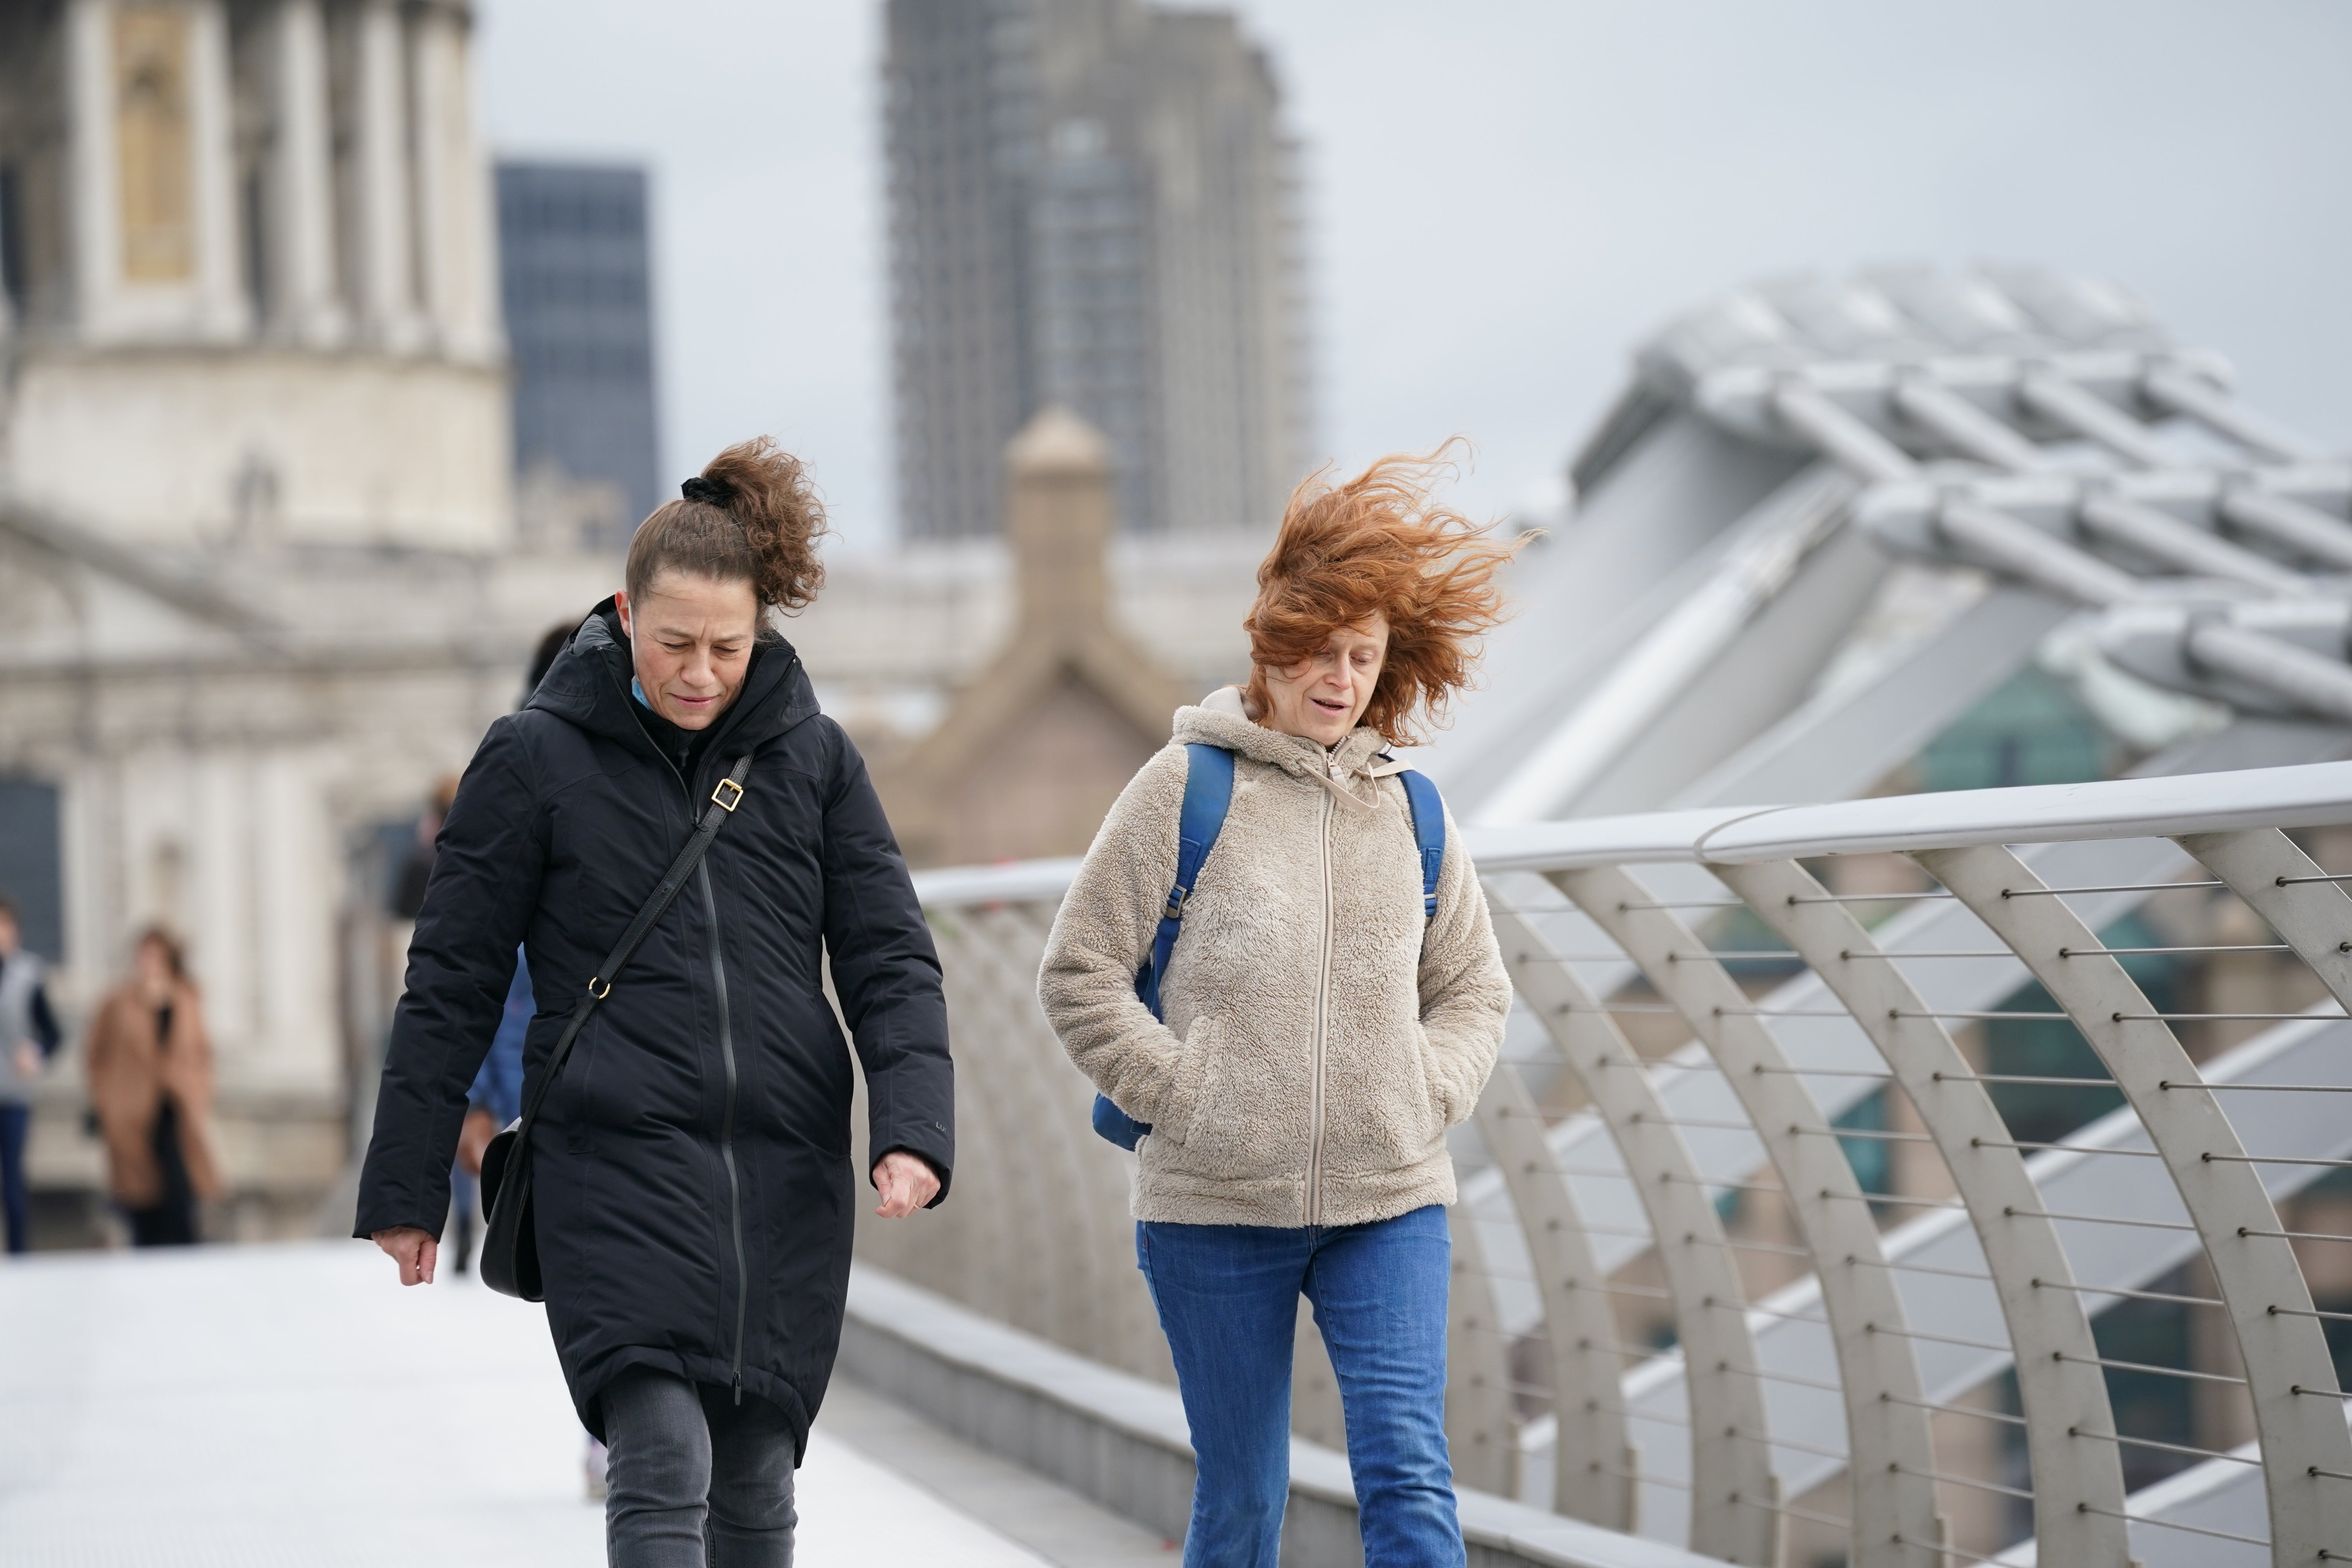 People buffeted by the wind while crossing the Millennium Bridge, London (Yui Mok/PA)